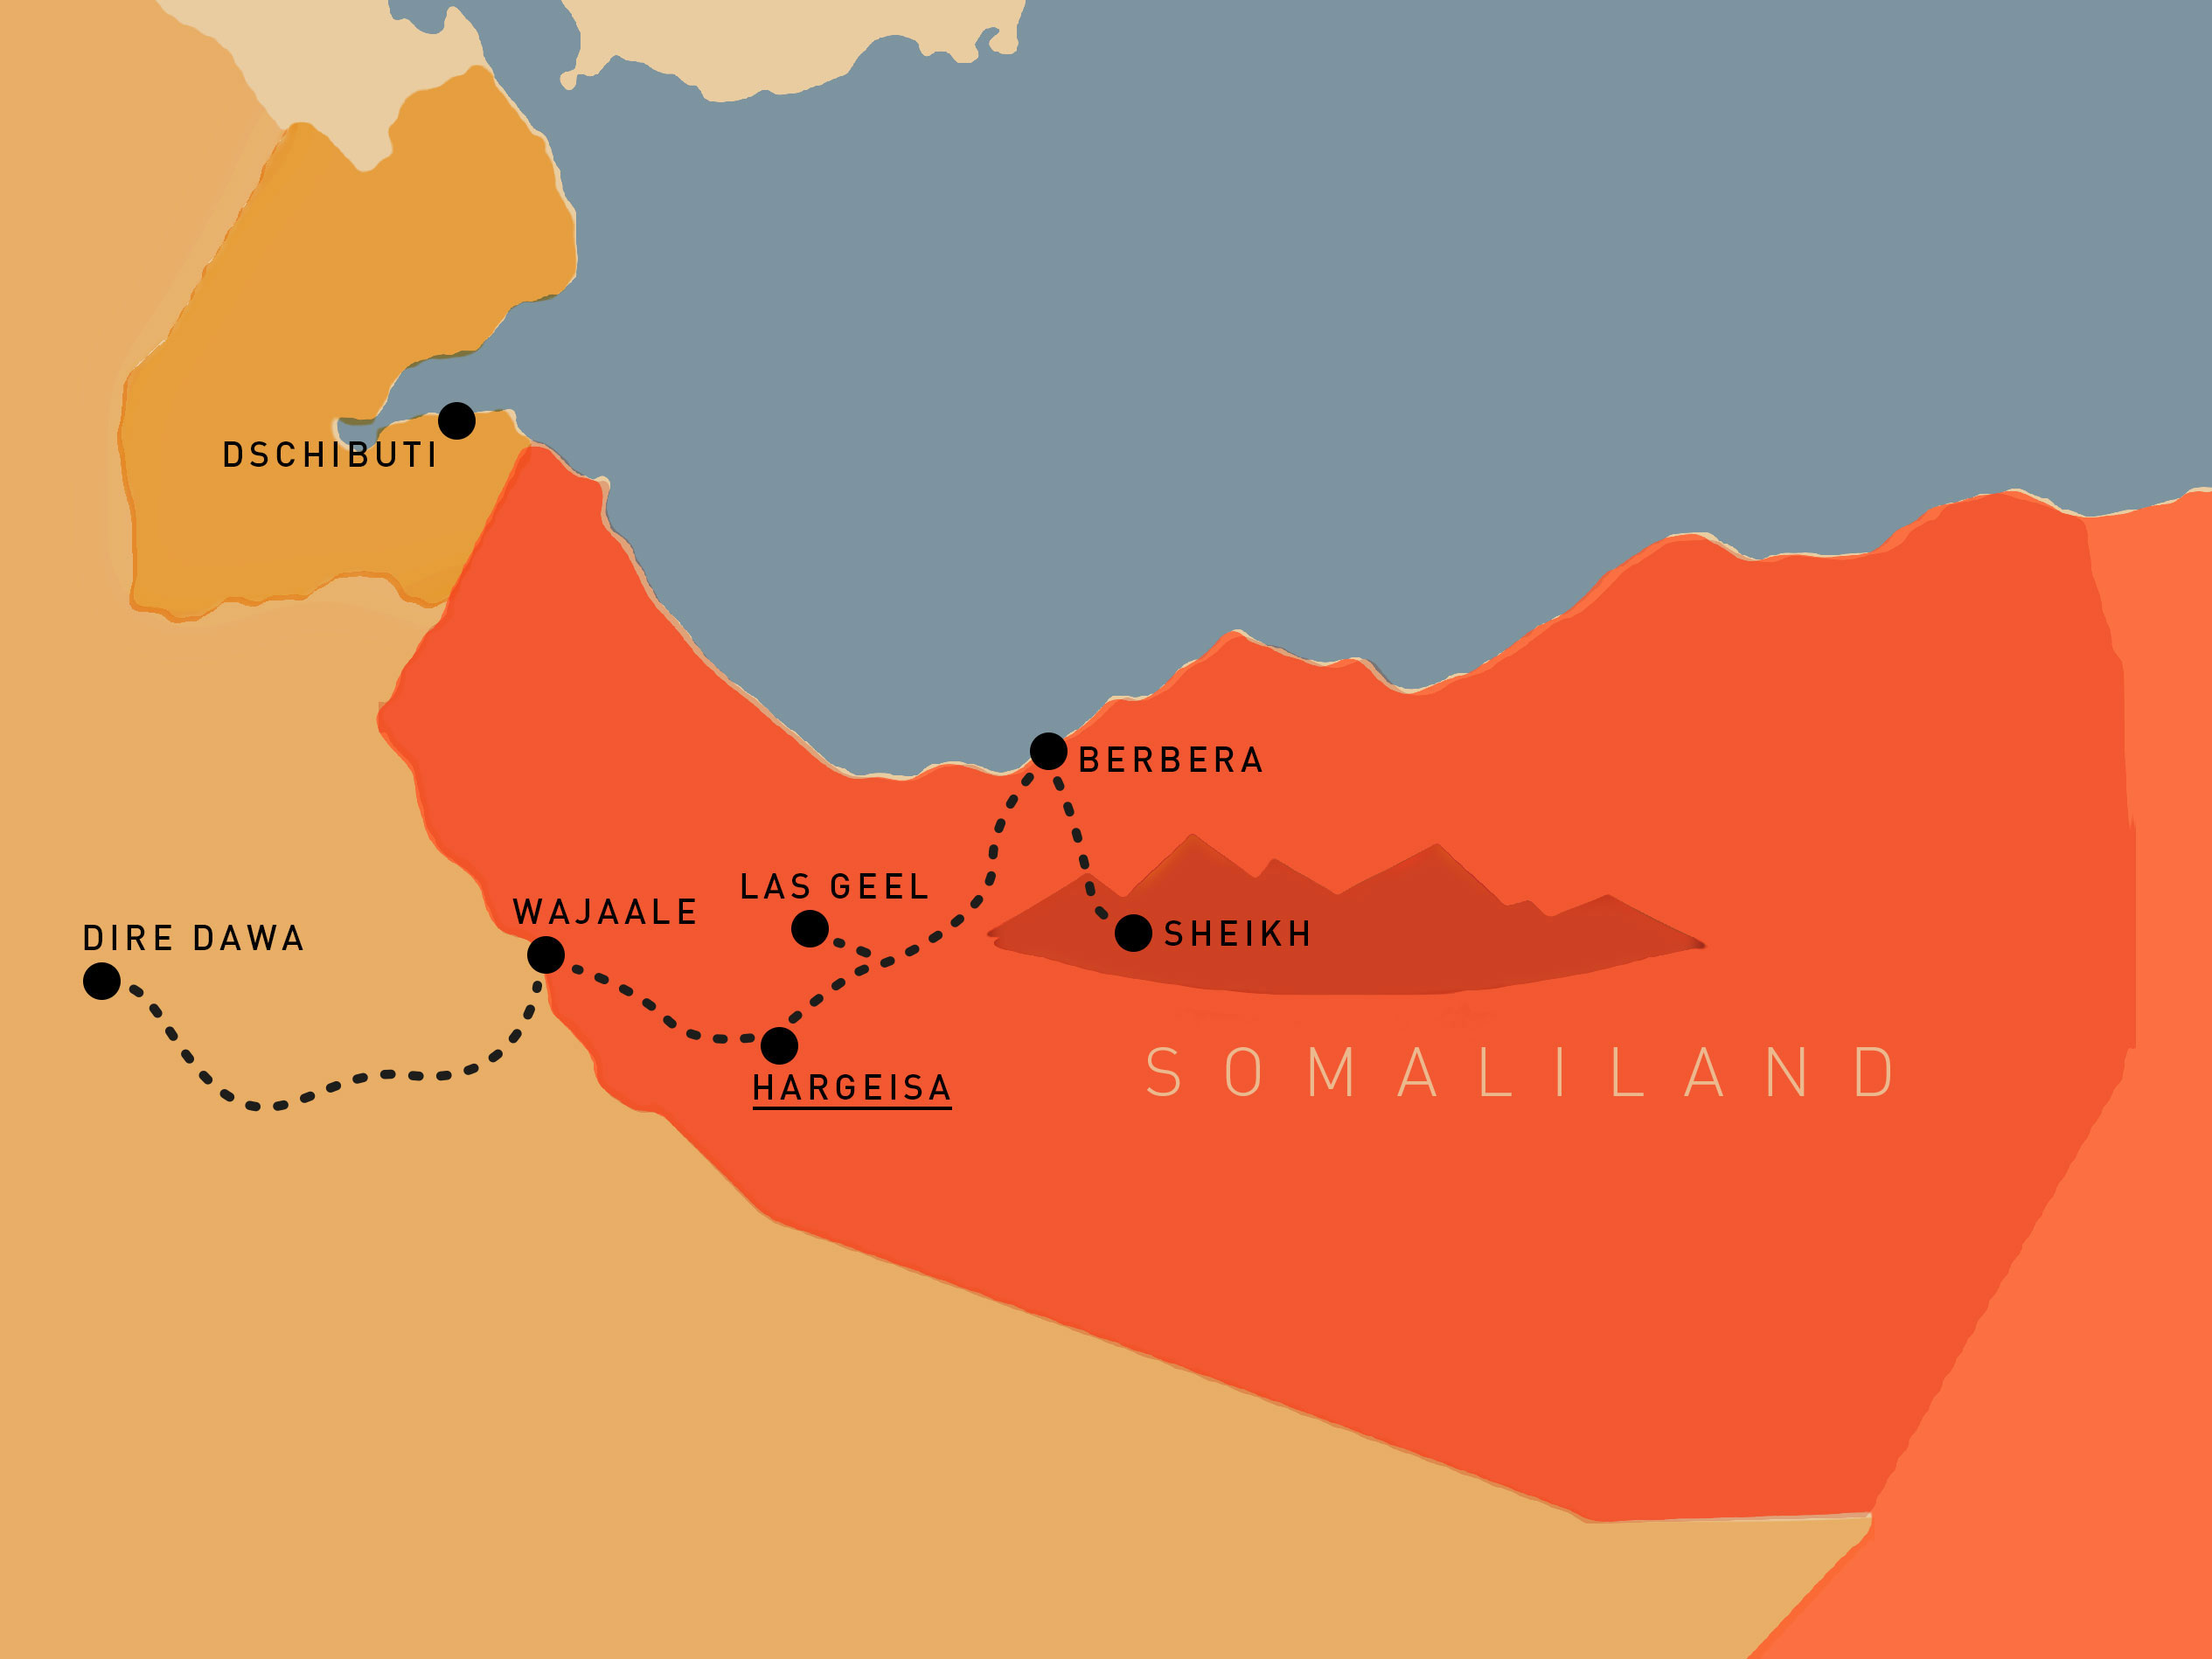 We start our journey in Ethiopia, in Wajaale we cross the border to Somaliland.